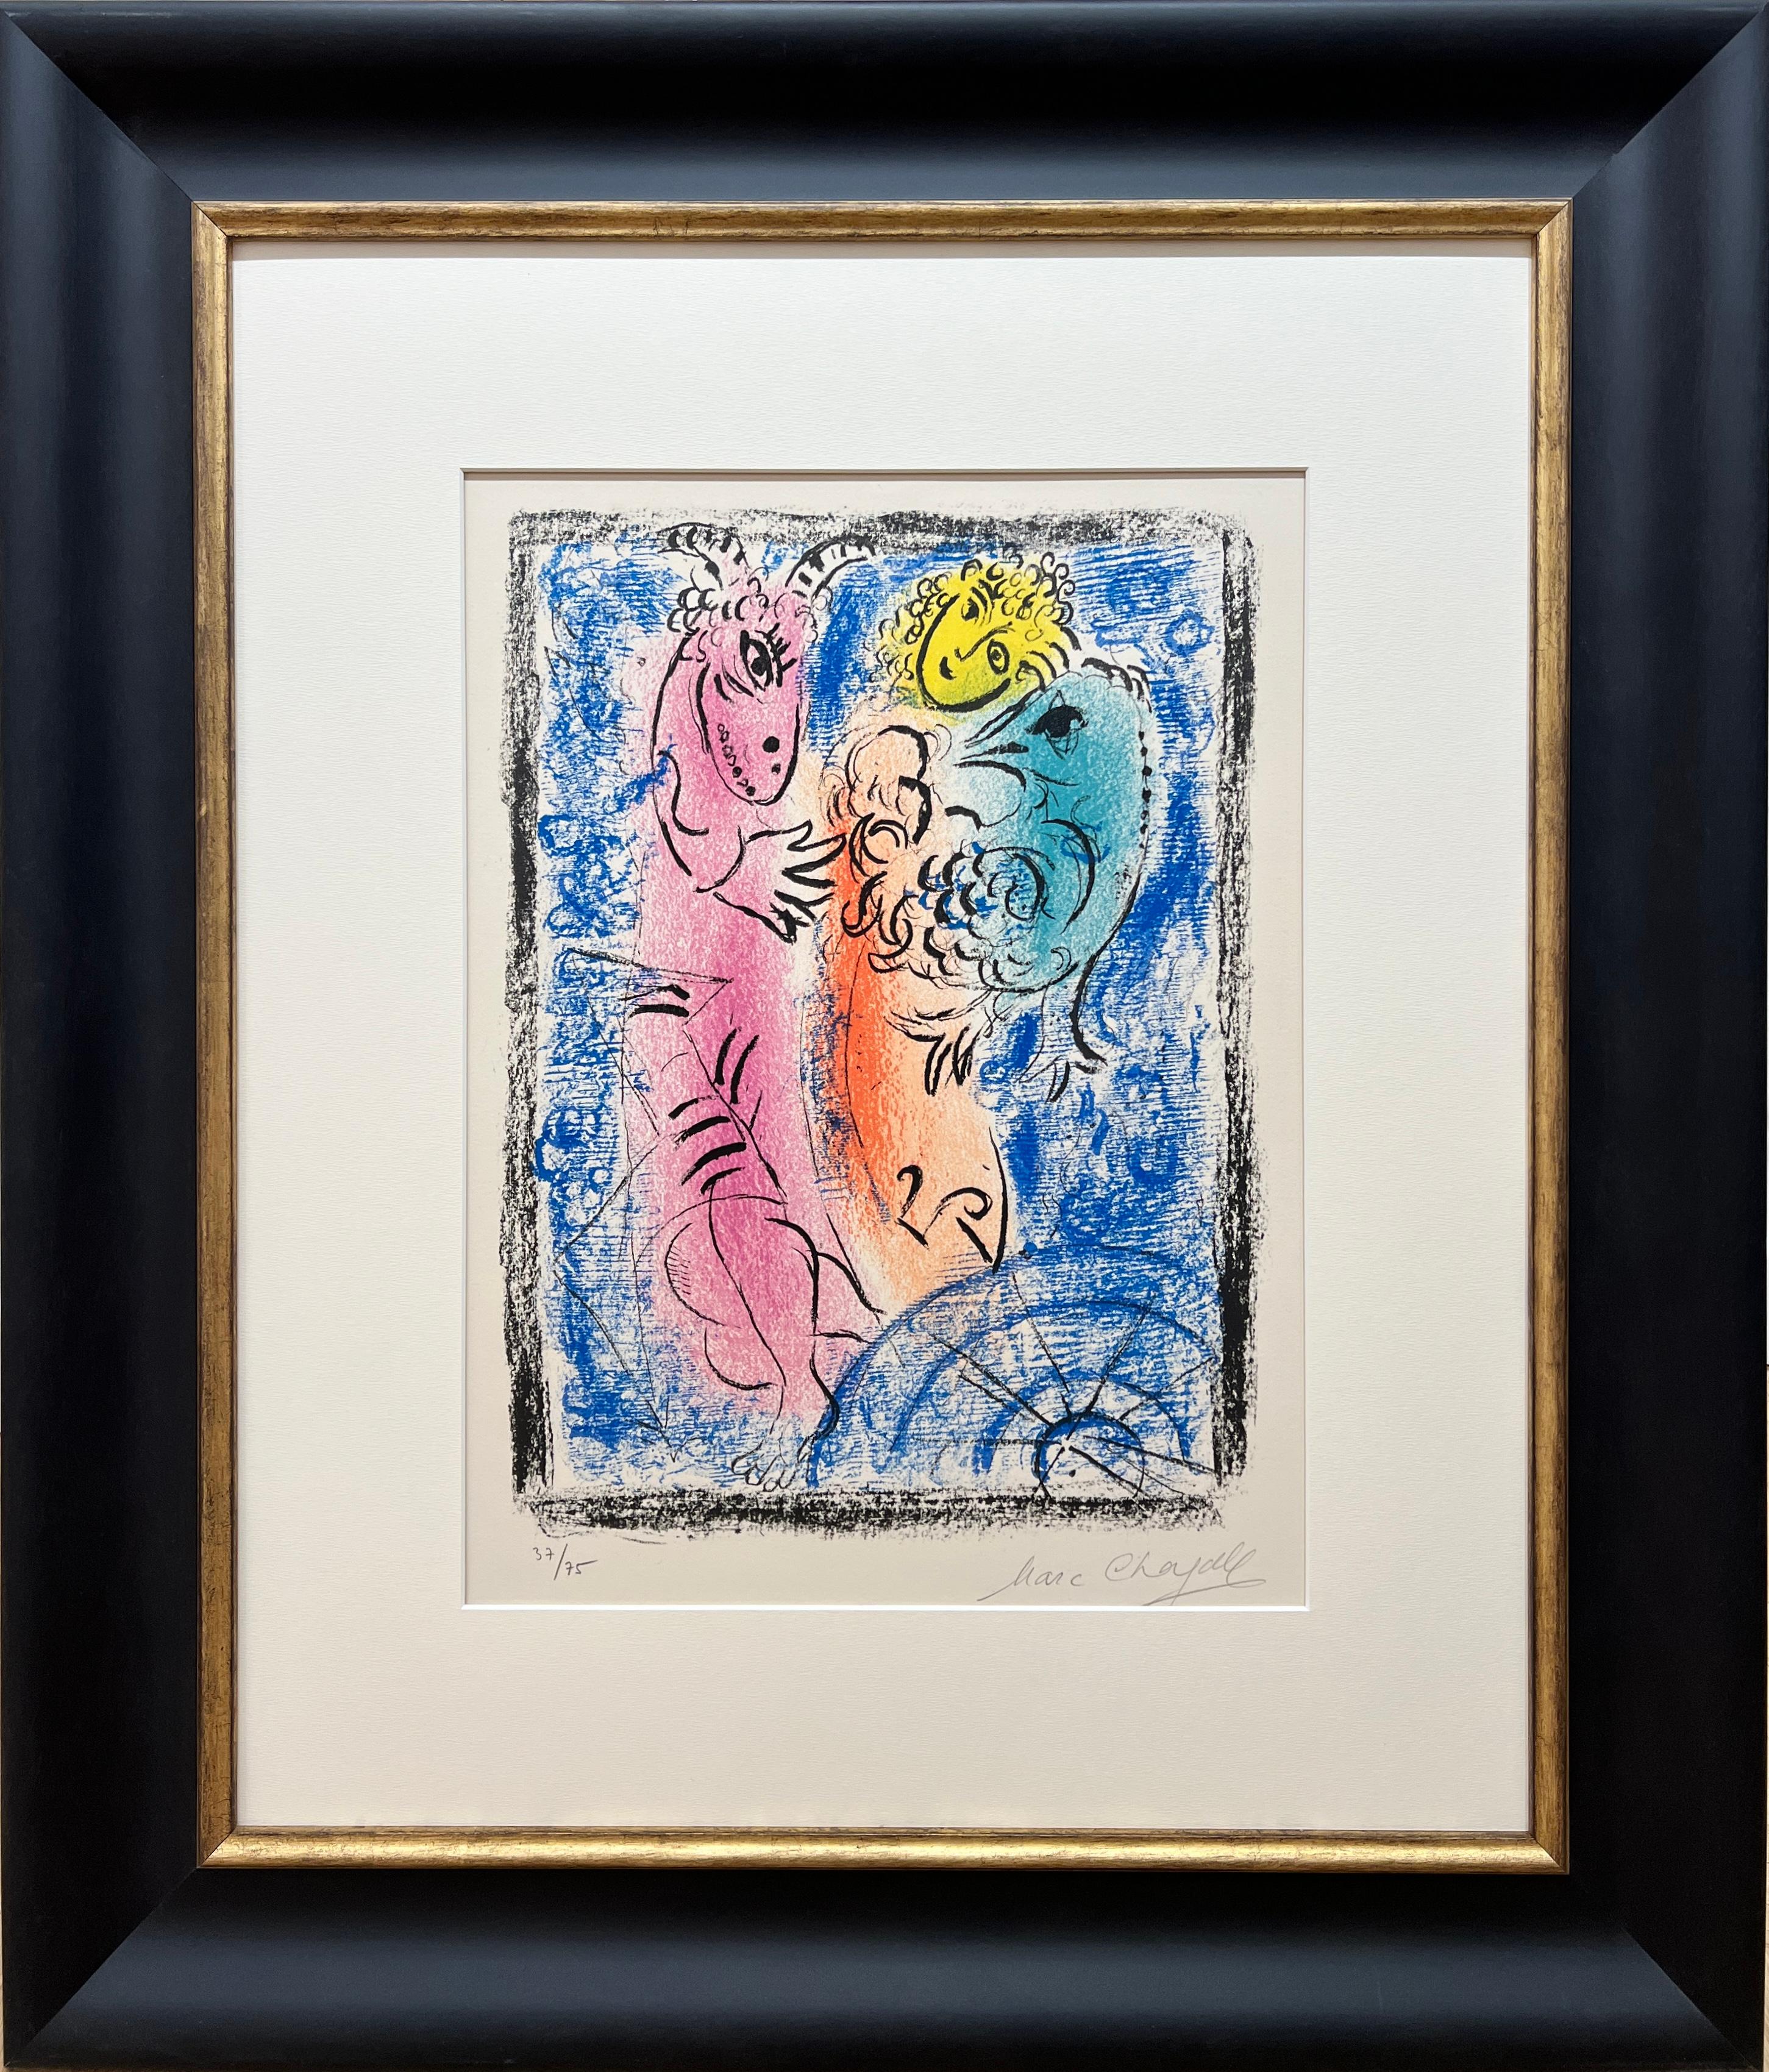 Color lithograph on Arches paper, edited in 1962
Limited edition of 75 copies
signed in pencil by artist in lower right corner and numbered 37/75 in lower left corner
Framed size: 75,5 x 64,5 cm
paper size: 57 x 42,2 cm
Very good conditions with